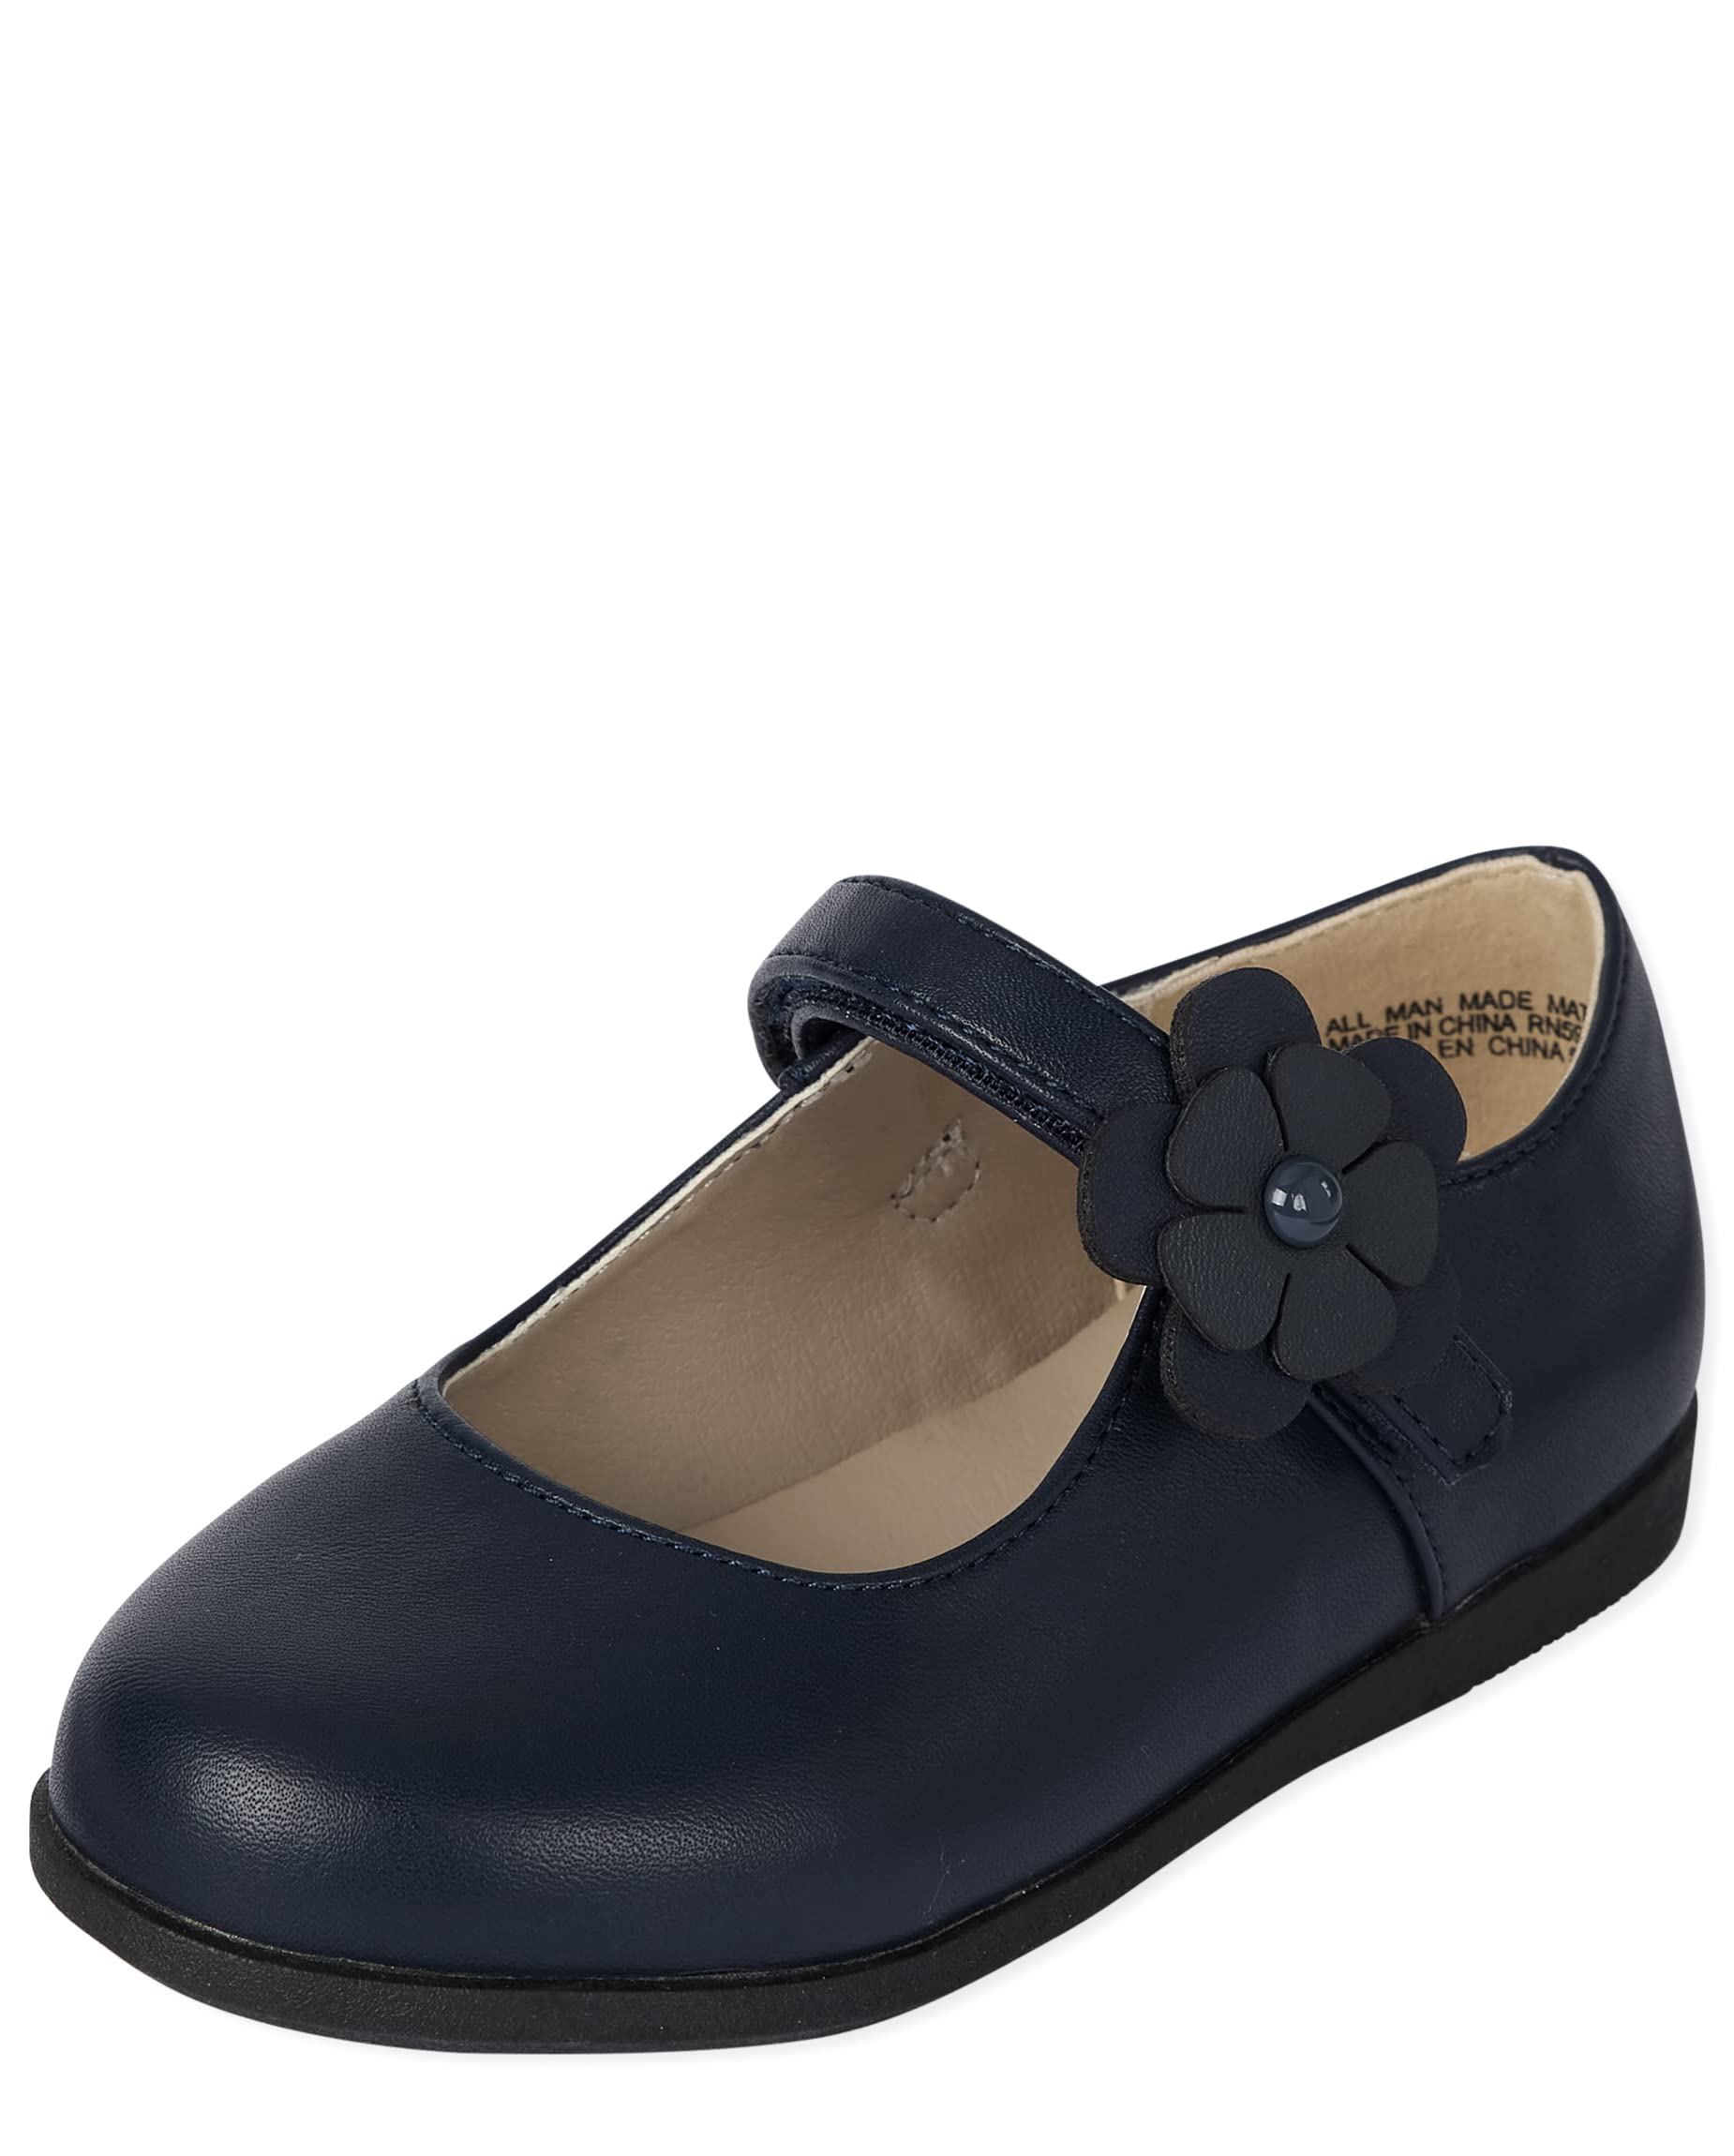 The Children's Place Baby-Girls and Toddler Closed Toe Maryjane Flats